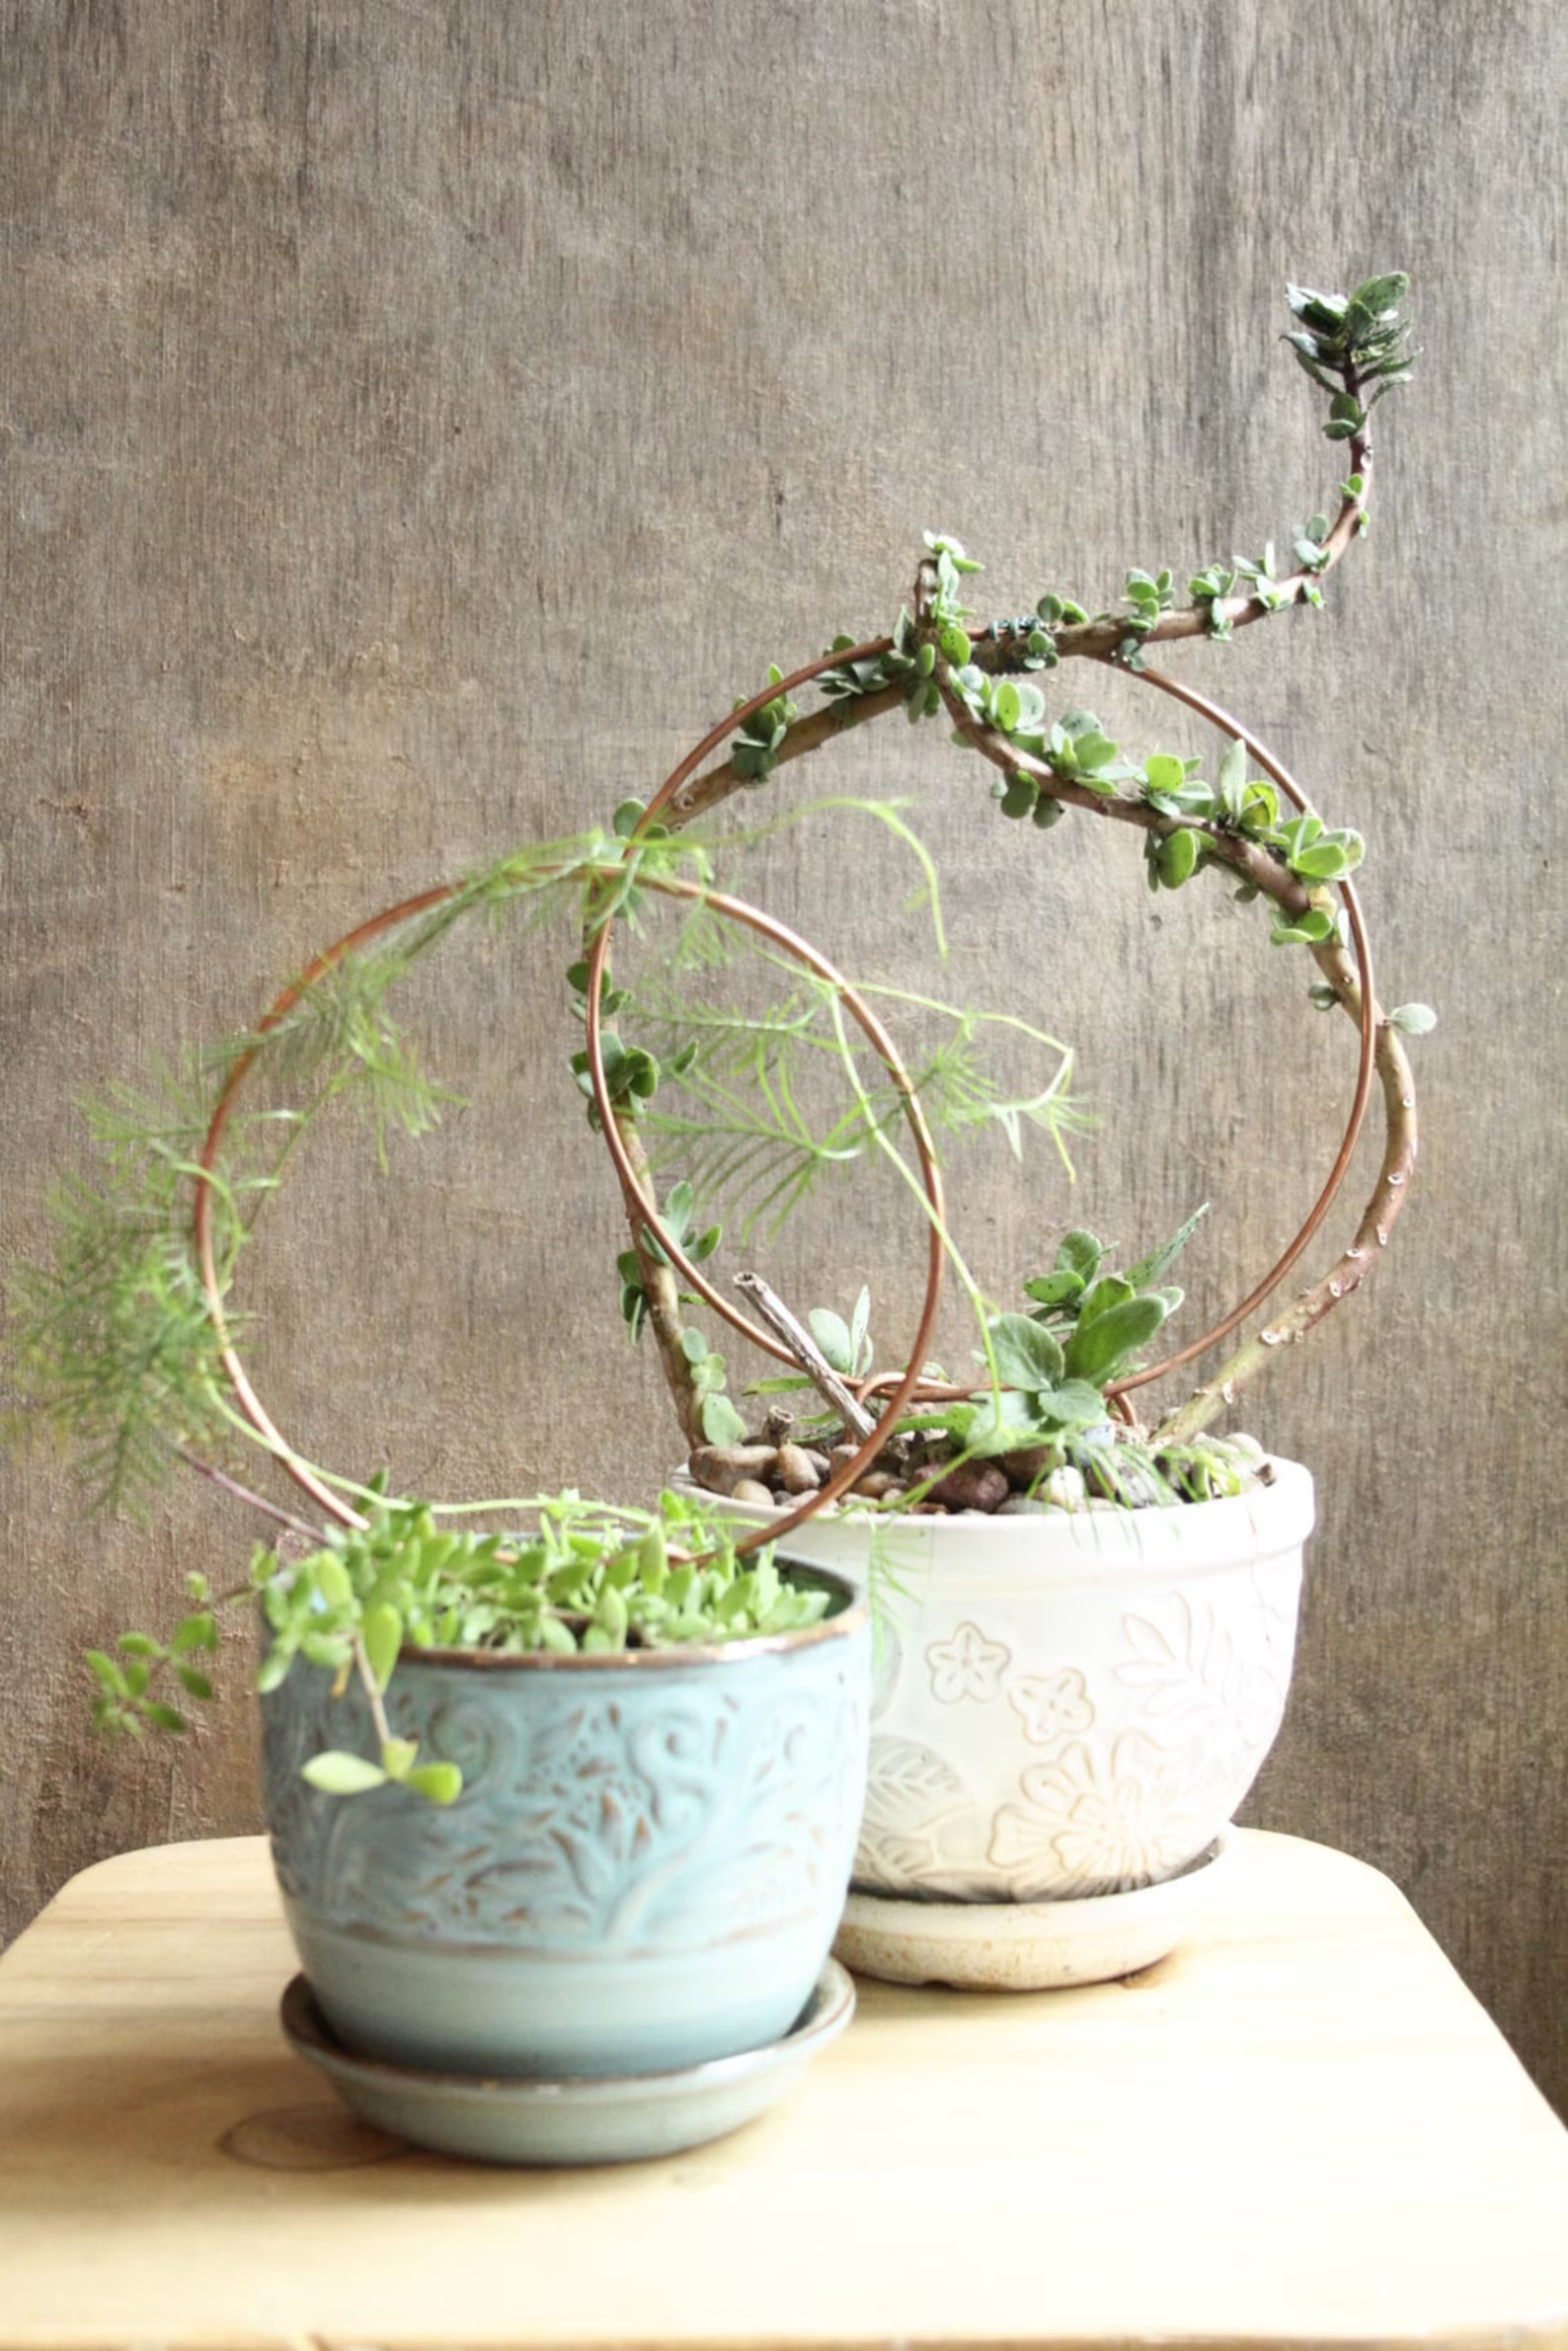 Creative Ideas For Displaying Your Indoor Plants - MadeTerra